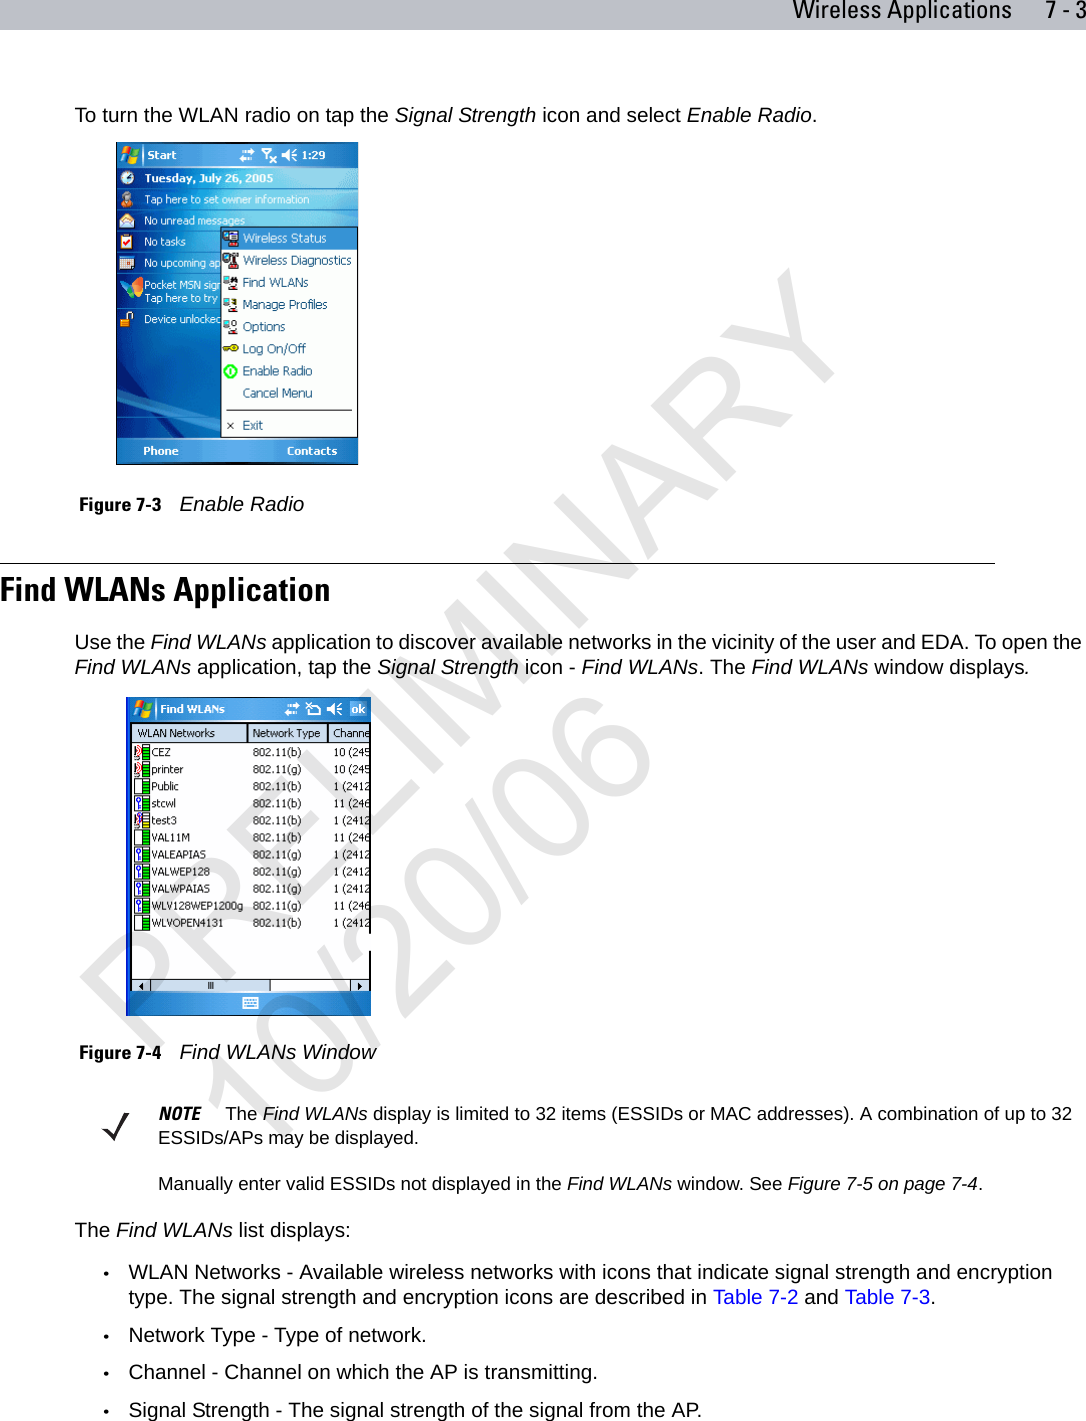 Wireless Applications 7 - 3To turn the WLAN radio on tap the Signal Strength icon and select Enable Radio. Figure 7-3    Enable RadioFind WLANs ApplicationUse the Find WLANs application to discover available networks in the vicinity of the user and EDA. To open the Find WLANs application, tap the Signal Strength icon - Find WLANs. The Find WLANs window displays. Figure 7-4    Find WLANs Window The Find WLANs list displays:•WLAN Networks - Available wireless networks with icons that indicate signal strength and encryption type. The signal strength and encryption icons are described in Table 7-2 and Table 7-3.•Network Type - Type of network.•Channel - Channel on which the AP is transmitting.•Signal Strength - The signal strength of the signal from the AP.NOTE     The Find WLANs display is limited to 32 items (ESSIDs or MAC addresses). A combination of up to 32 ESSIDs/APs may be displayed.Manually enter valid ESSIDs not displayed in the Find WLANs window. See Figure 7-5 on page 7-4.PRELIMINARY10/20/06